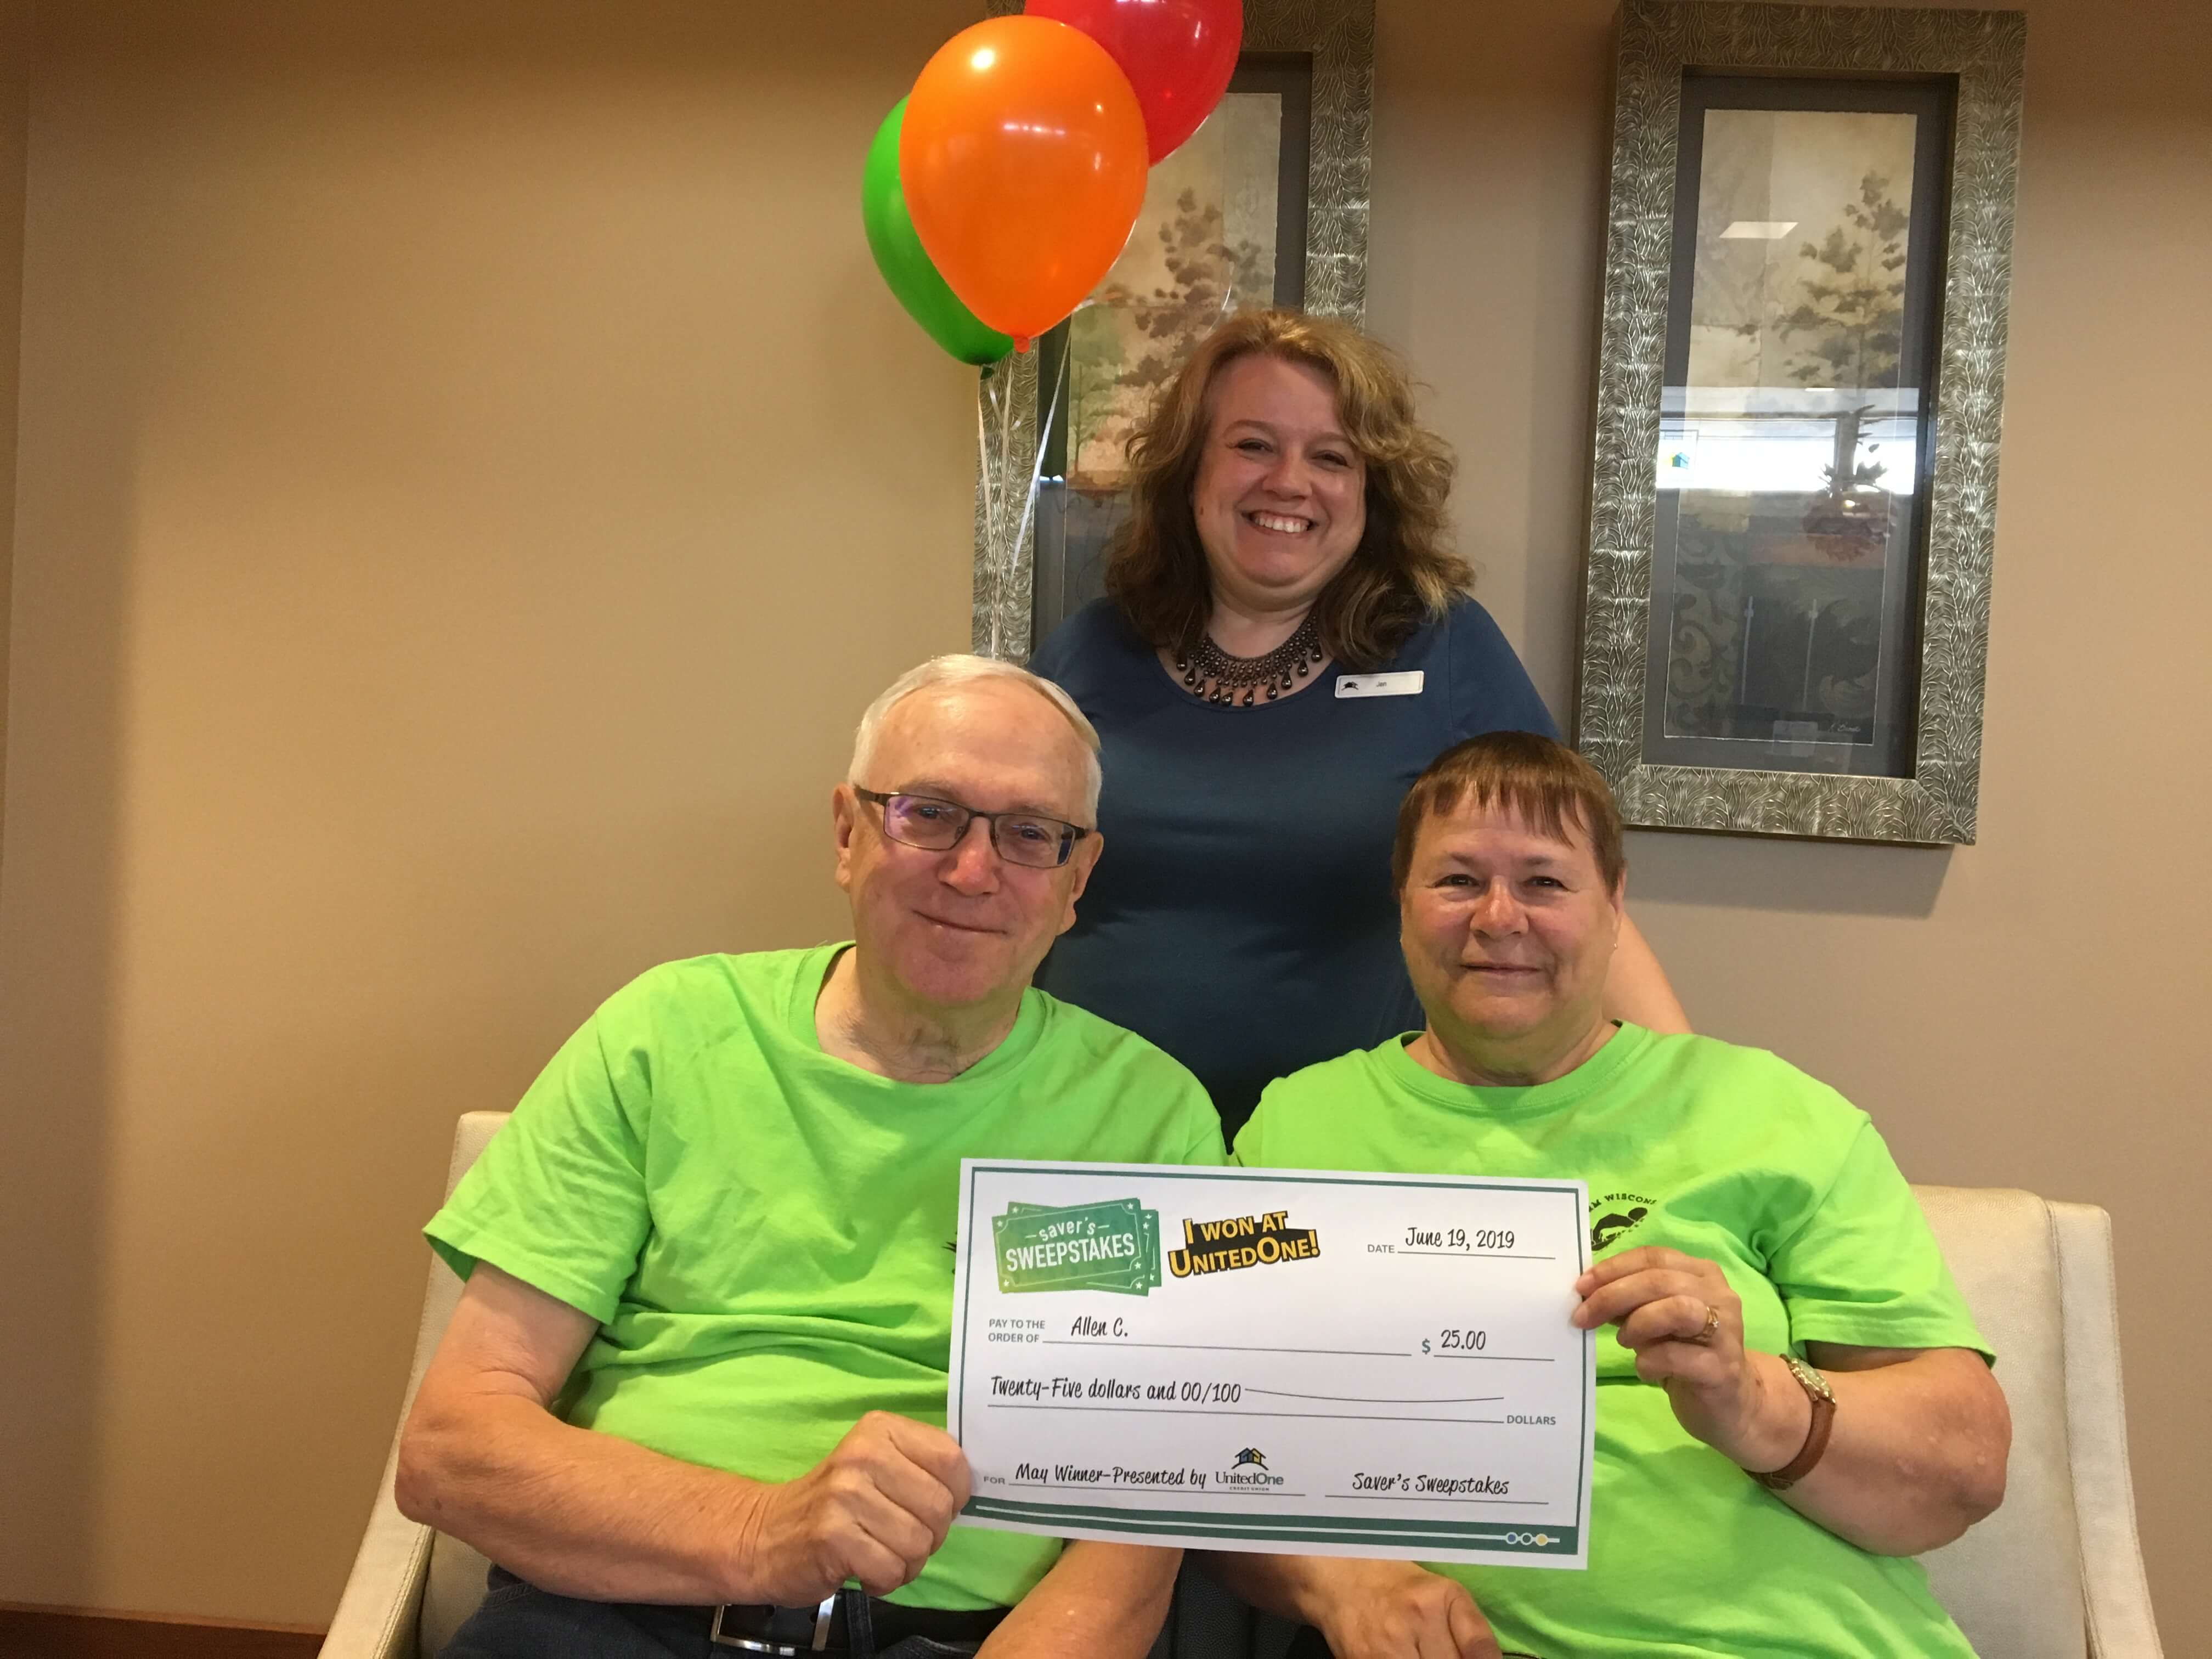 Allen C., a UnitedOne member, won $25 in June's Saver's Sweepstakes drawing.